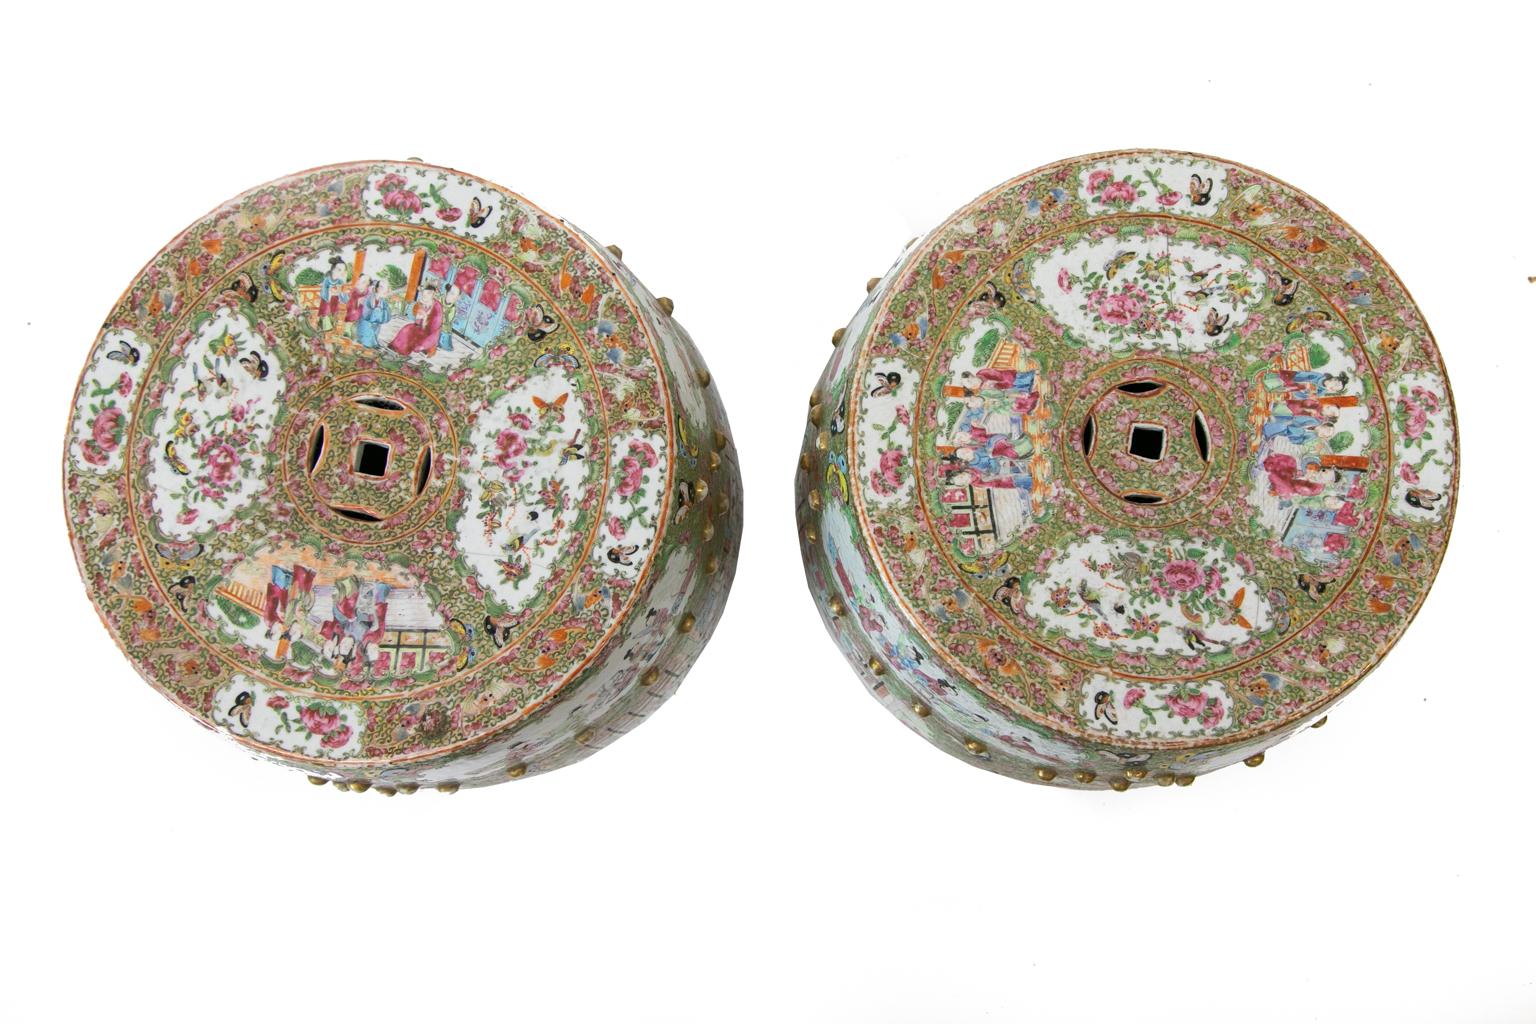 Near pair of Rose Mandarin garden seats, the sides having multiple cartouches with mandarin court scenes with double reticulated medallions bordered by gilt stud work.
 